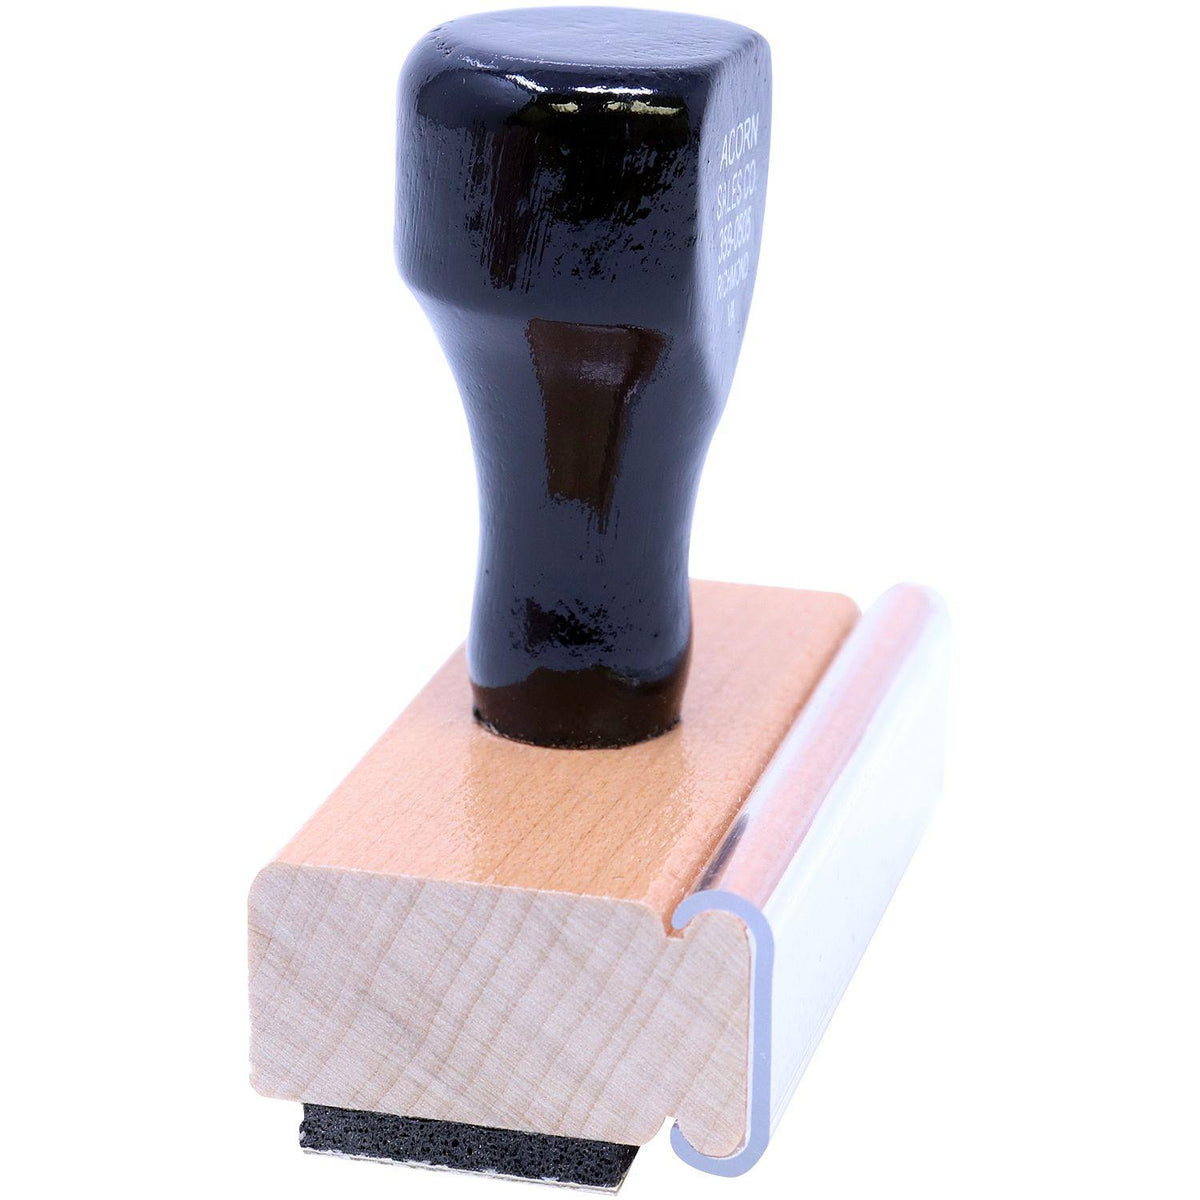 Official Transcript Rubber Stamp - Engineer Seal Stamps - Brand_Acorn, Impression Size_Small, Stamp Type_Regular Stamp, Type of Use_Teacher